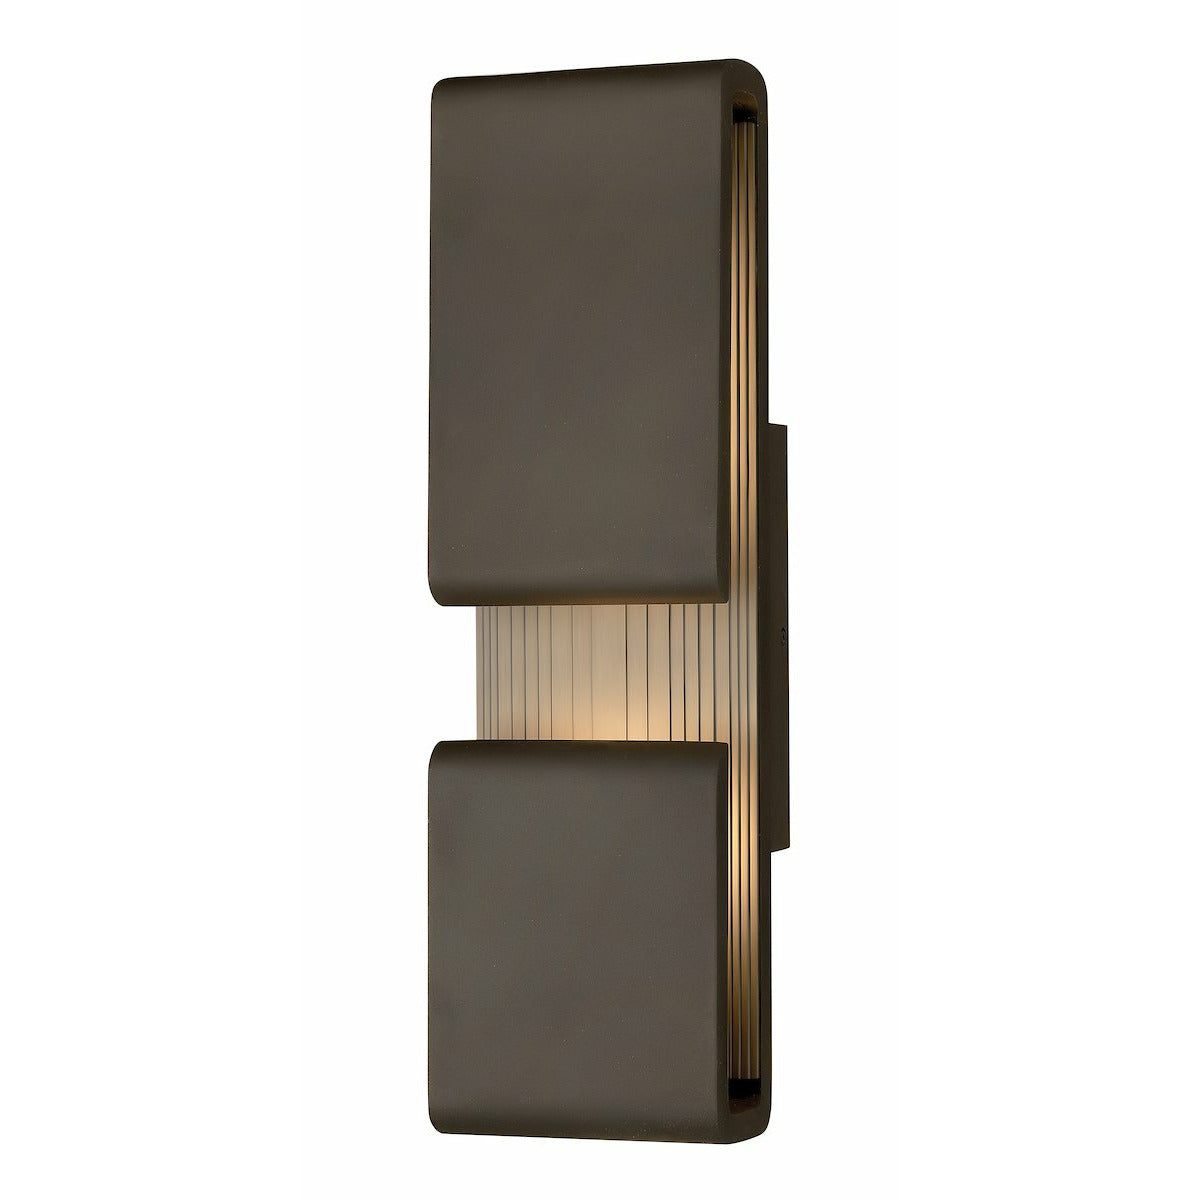 Contour Outdoor Wall Light Oil Rubbed Bronze